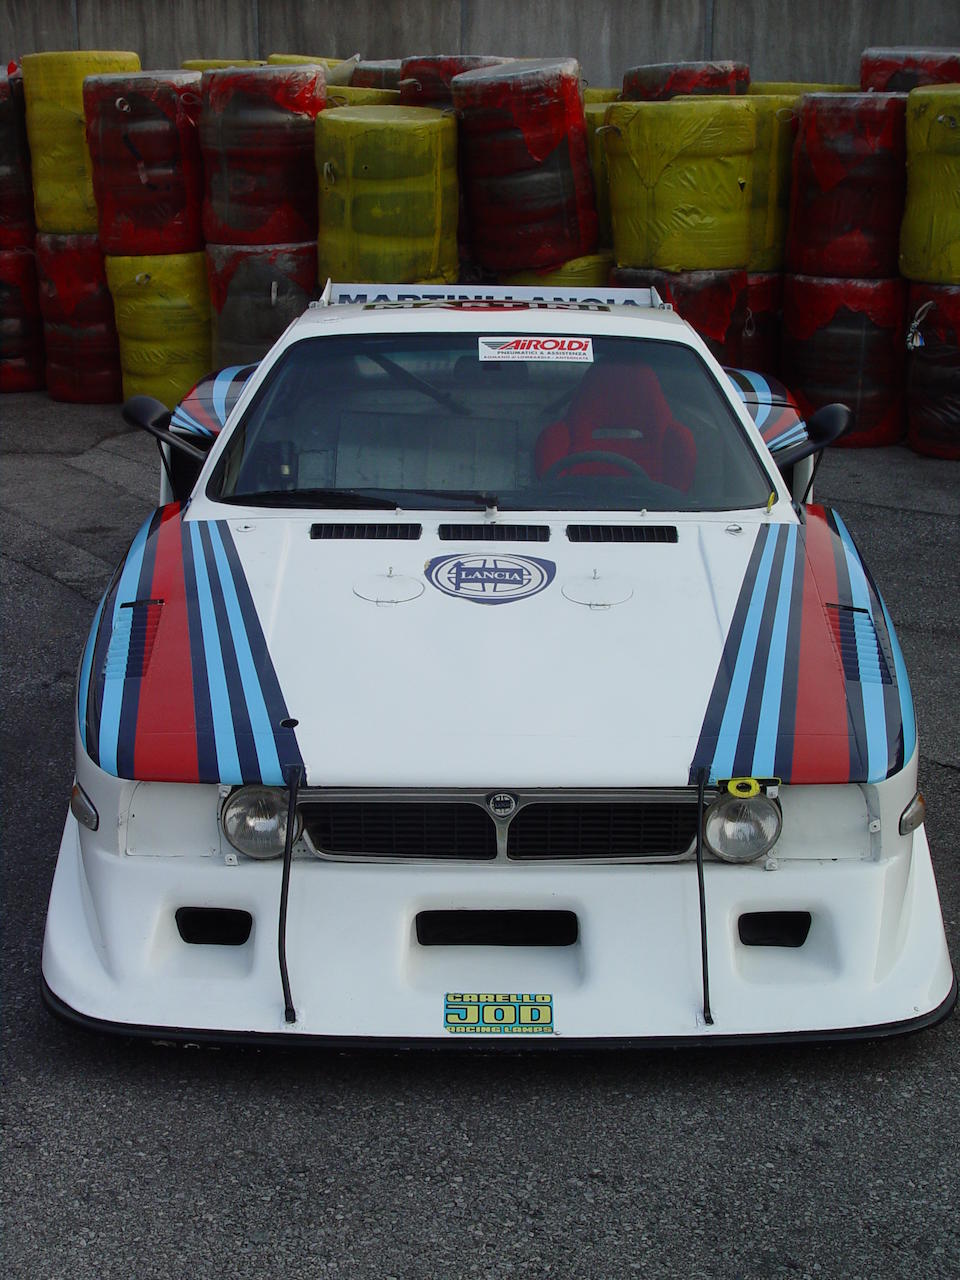 Winner of the Group V class at the 1981 Le Mans 24H,1981 Lancia Beta Montecarlo Turbo Group 5 Prototype  Chassis no. 1009